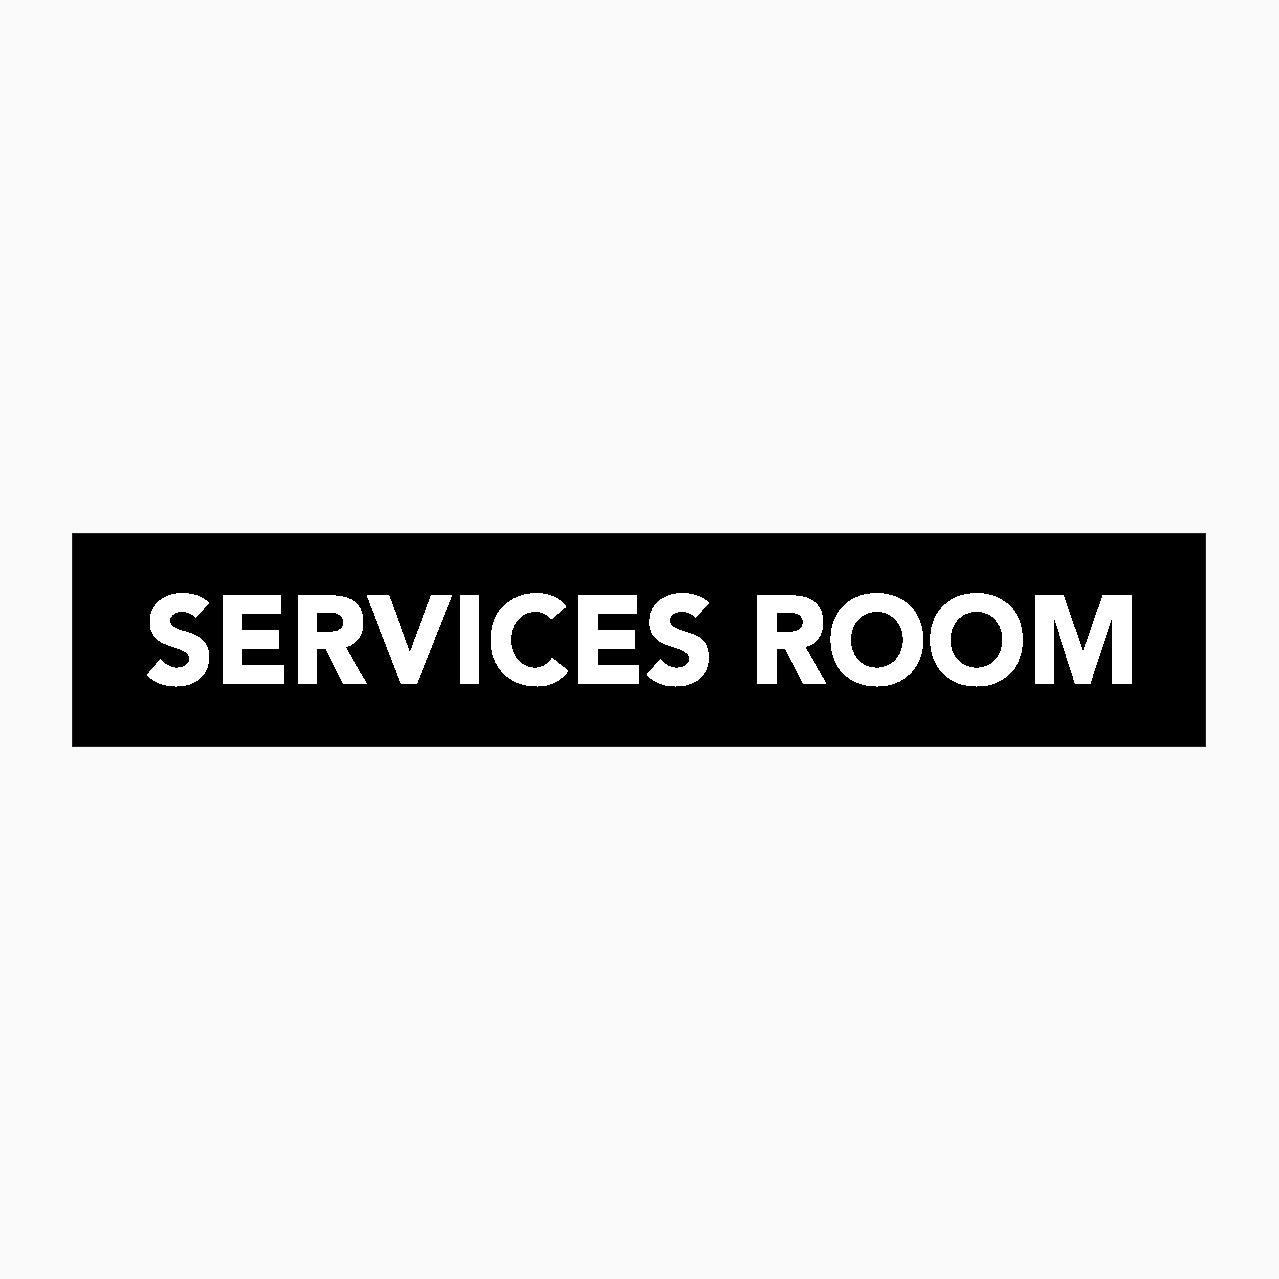 SERVICES ROOM SIGN - STATUTORY SIGN